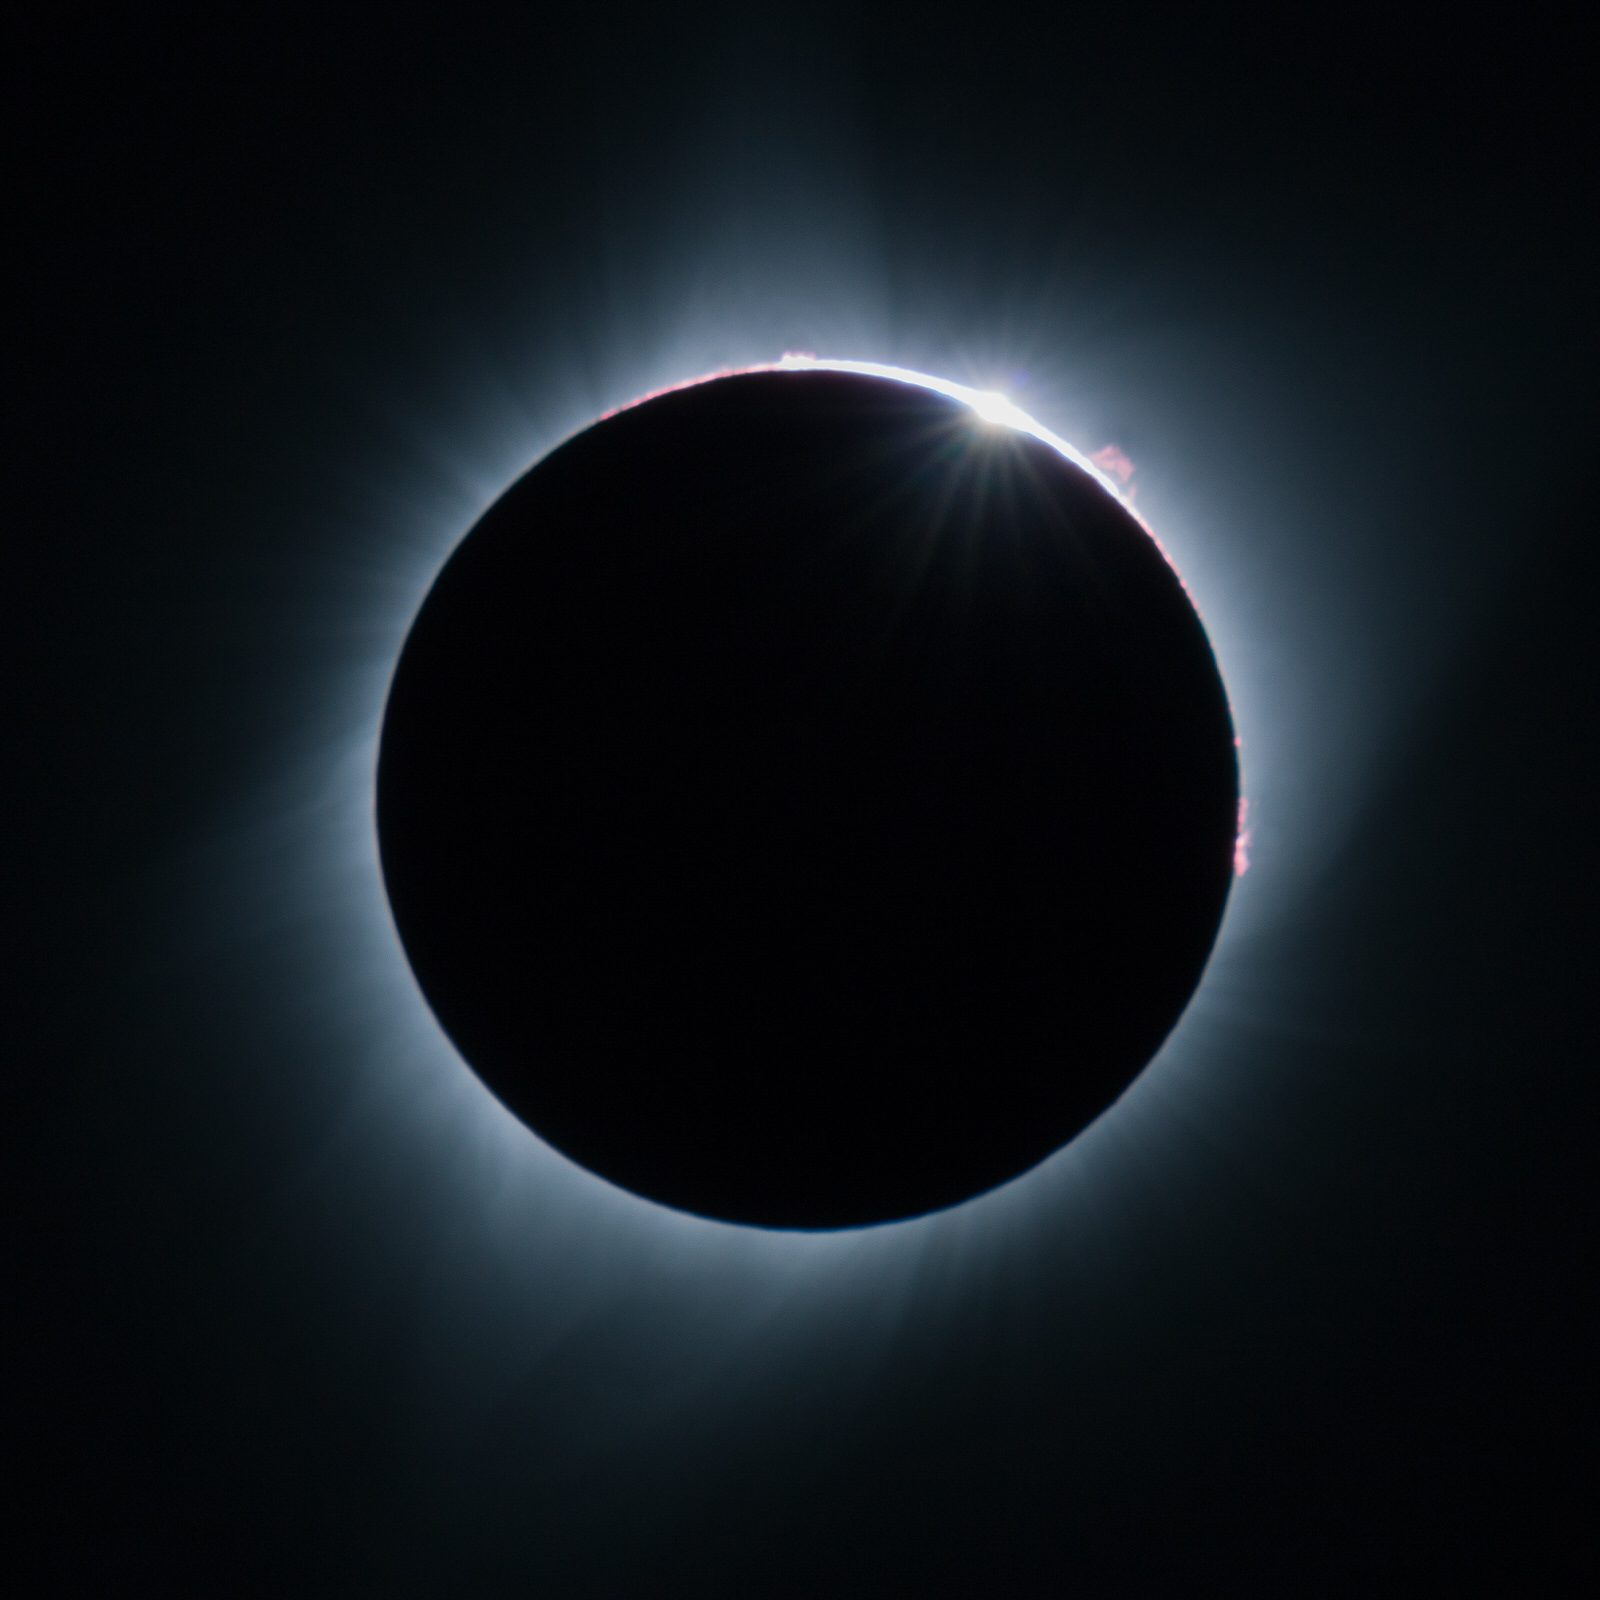  Totality of the Great Solar Eclipse of 2017 